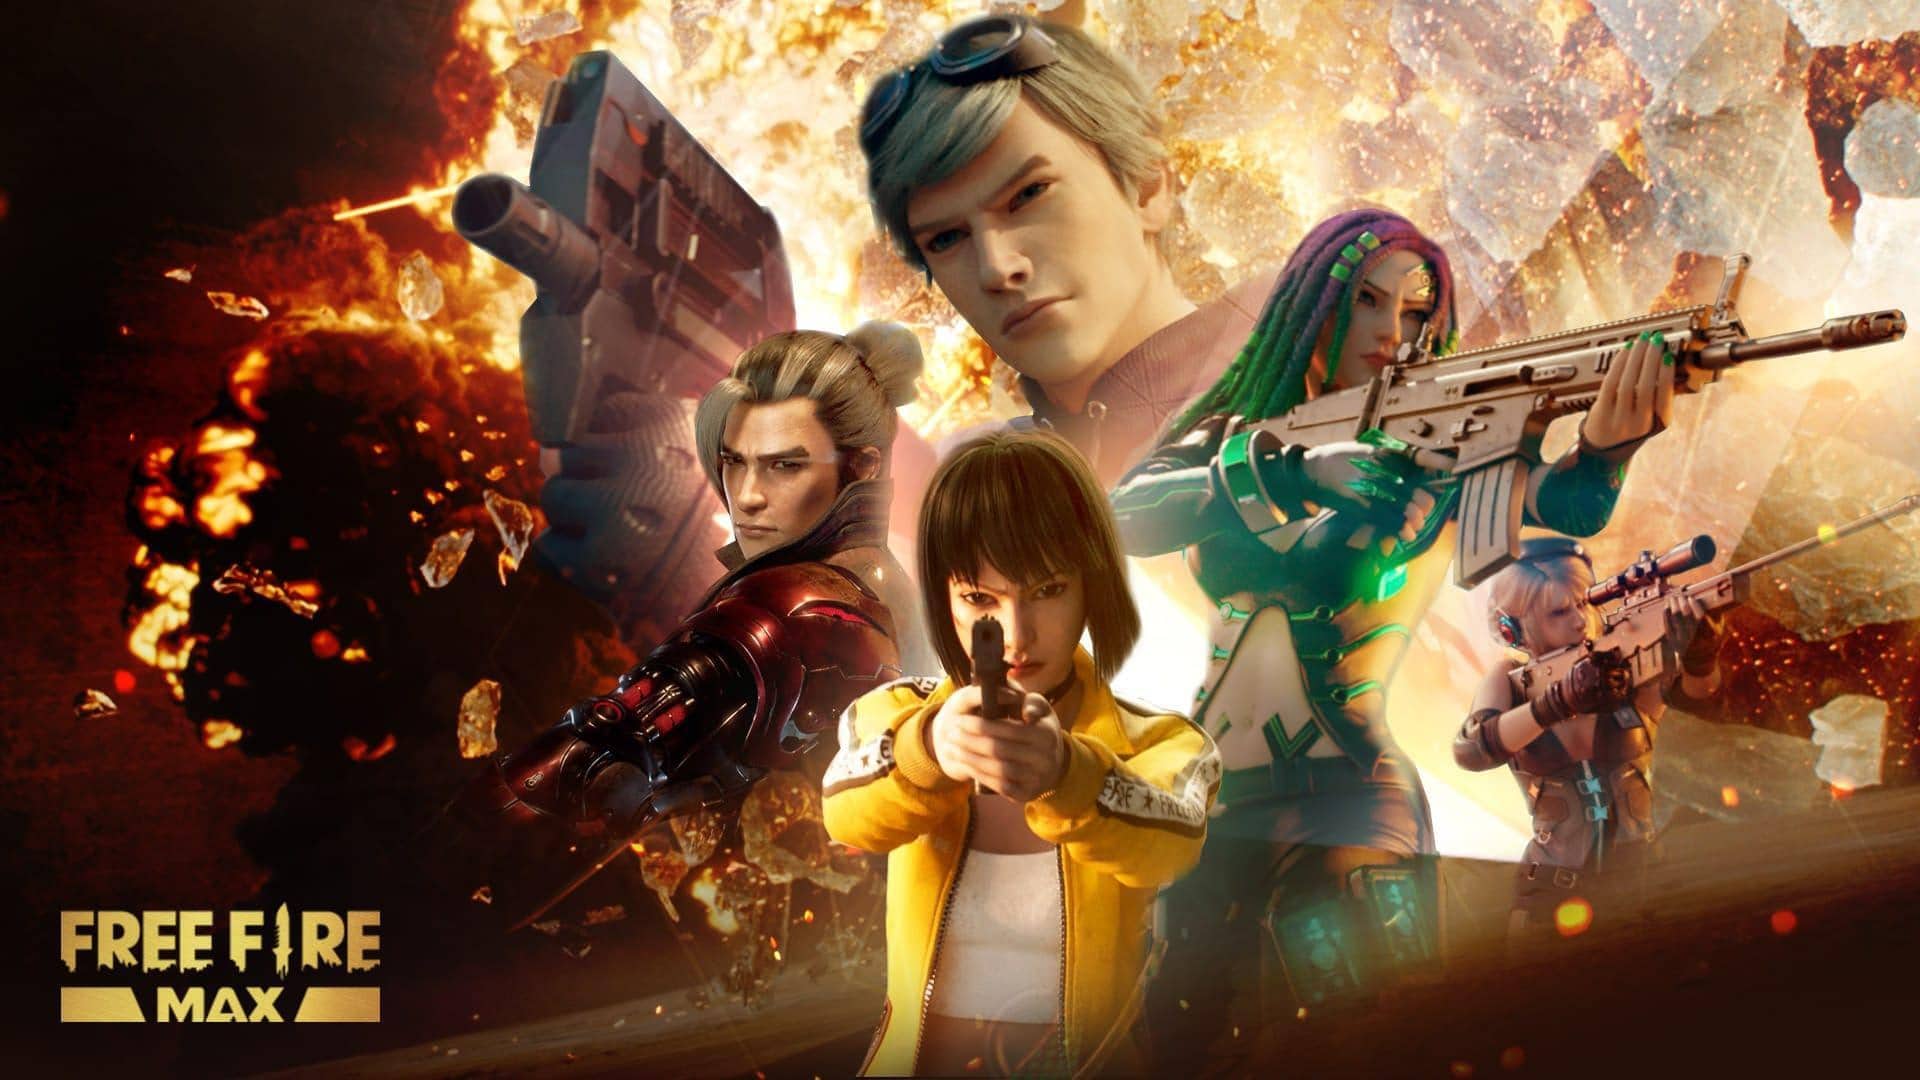 Garena Free Fire MAX codes for April 4: Redeem now